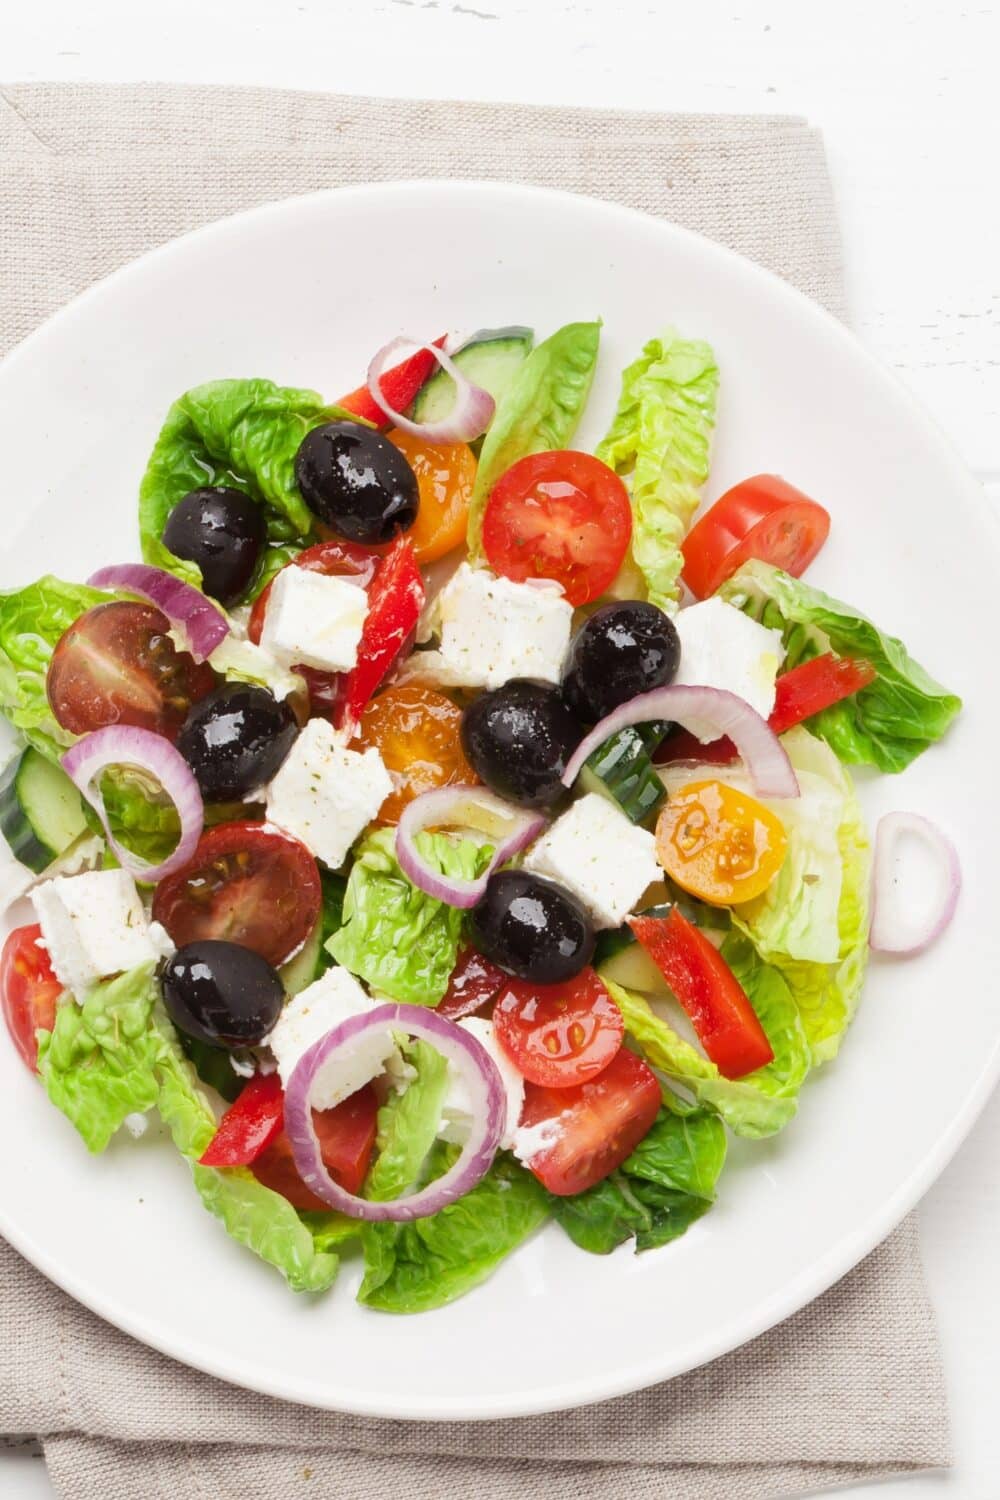 Greek Salad, a classic Mediterranean delight. Crisp lettuce leaves serve as the base, adorned with a colorful assortment of ingredients. Ripe tomatoes, refreshing cucumber slices, tangy Kalamata olives, and creamy feta cheese are generously scattered throughout the salad. The flavors are enhanced with a drizzle of extra virgin olive oil and a sprinkle of aromatic herbs. This vibrant salad offers a refreshing combination of textures and tastes, capturing the essence of Greek cuisine in every bite